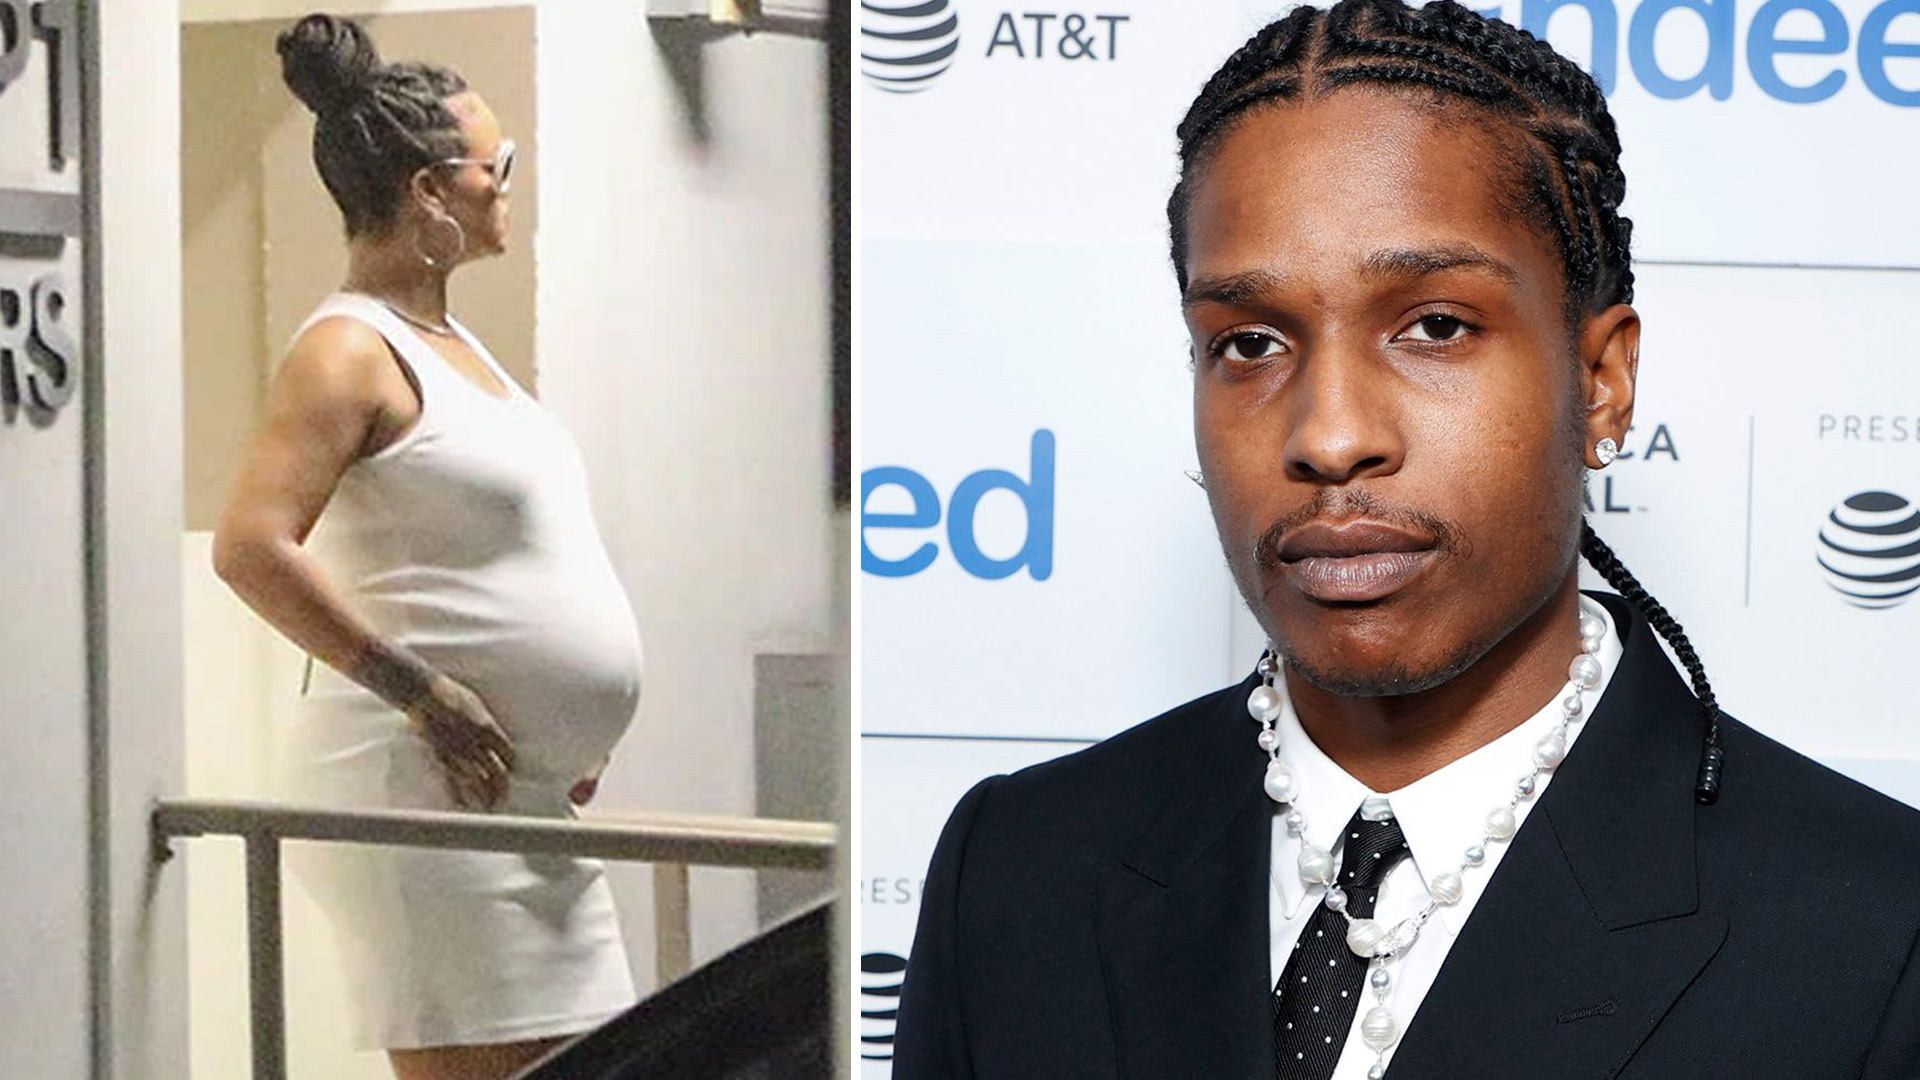 Rihanna Rocked White Mini Dress For A Date With A$AP Rocky!